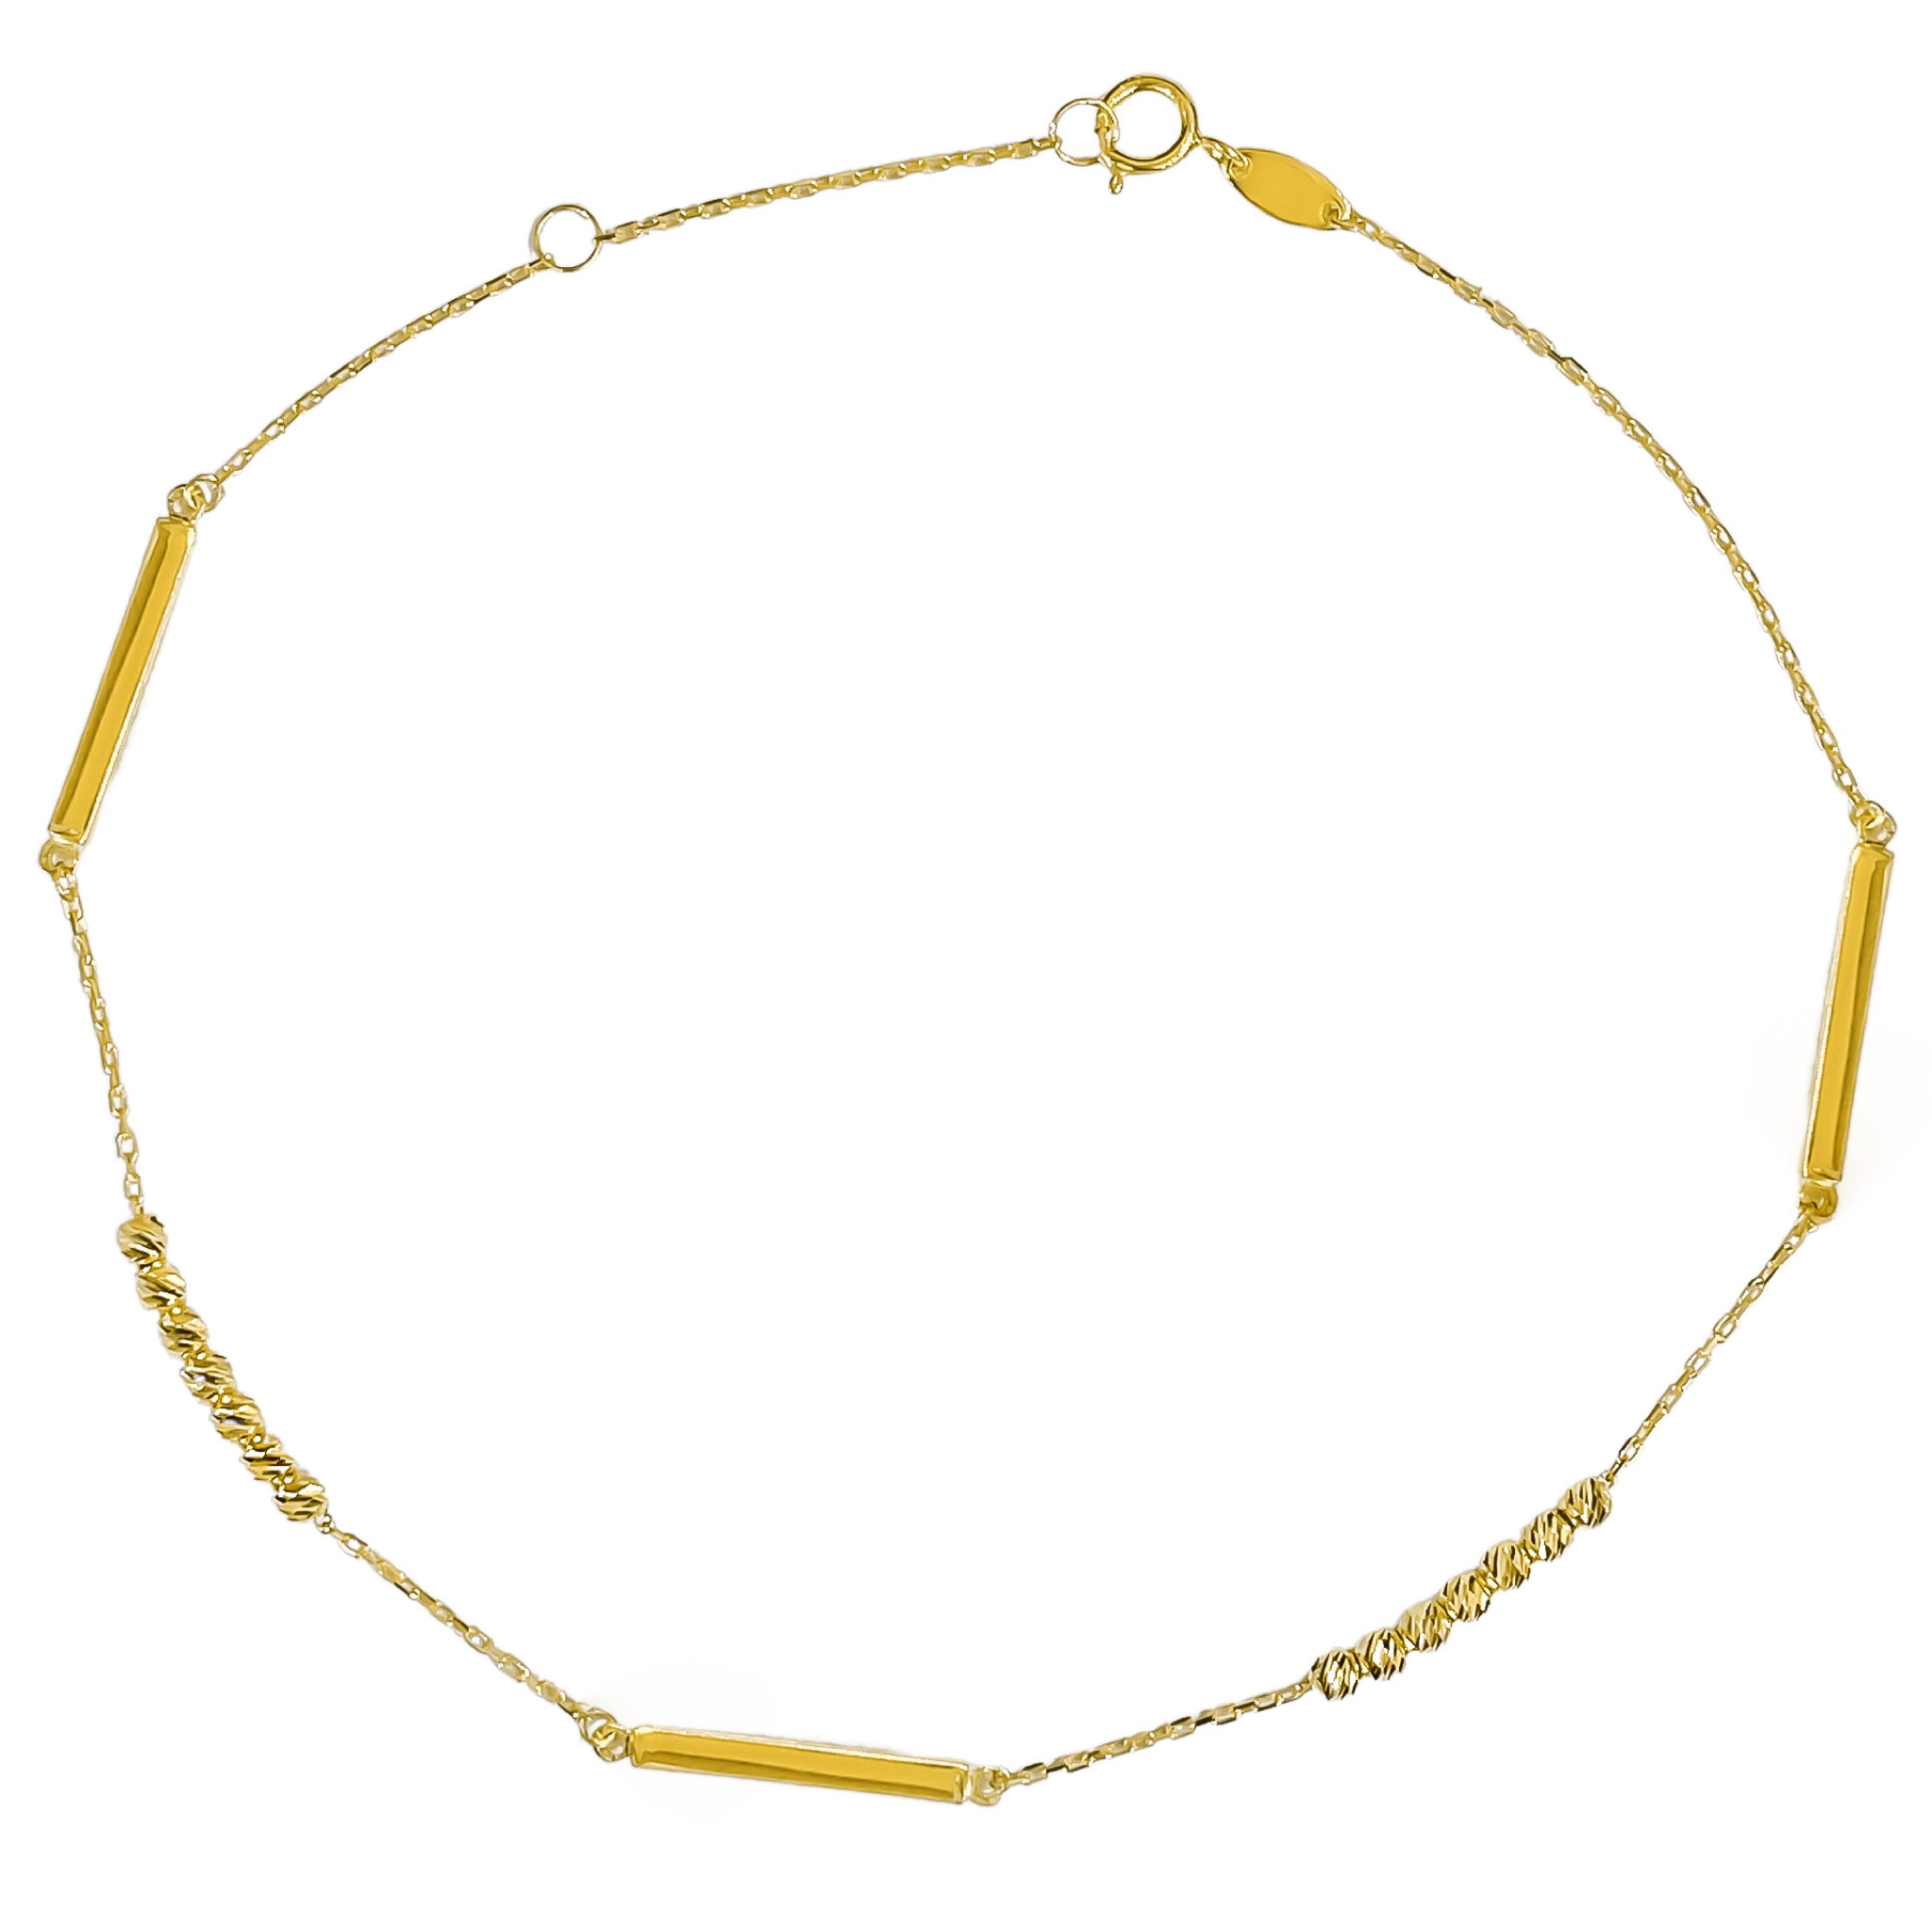 10K YELLOW GOLD MOON CUT BEADS & BARS ANKLET